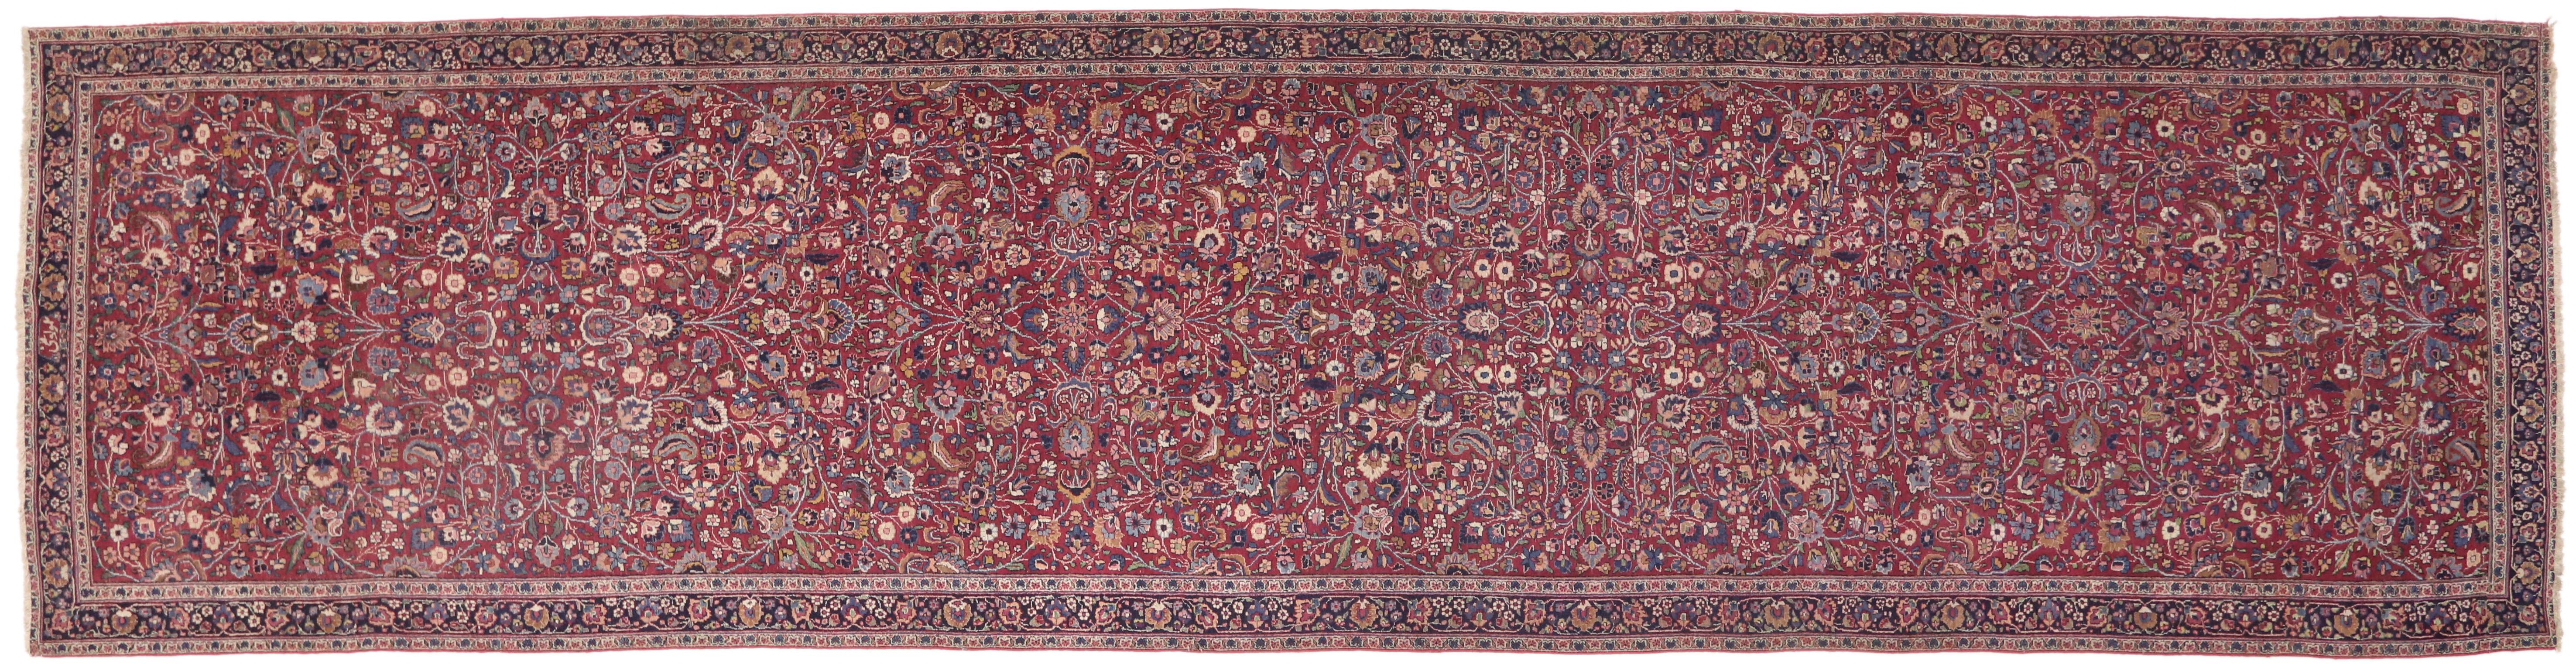 74286 Antique Persian Mashhad Runner with Old World Style, Extra Long Hallway Runner 05'07 x 22'00. Rich in color, texture and beguiling ambiance, this hand knotted wool antique Persian Mashhad rug runner beautifully displays timeless elegance and